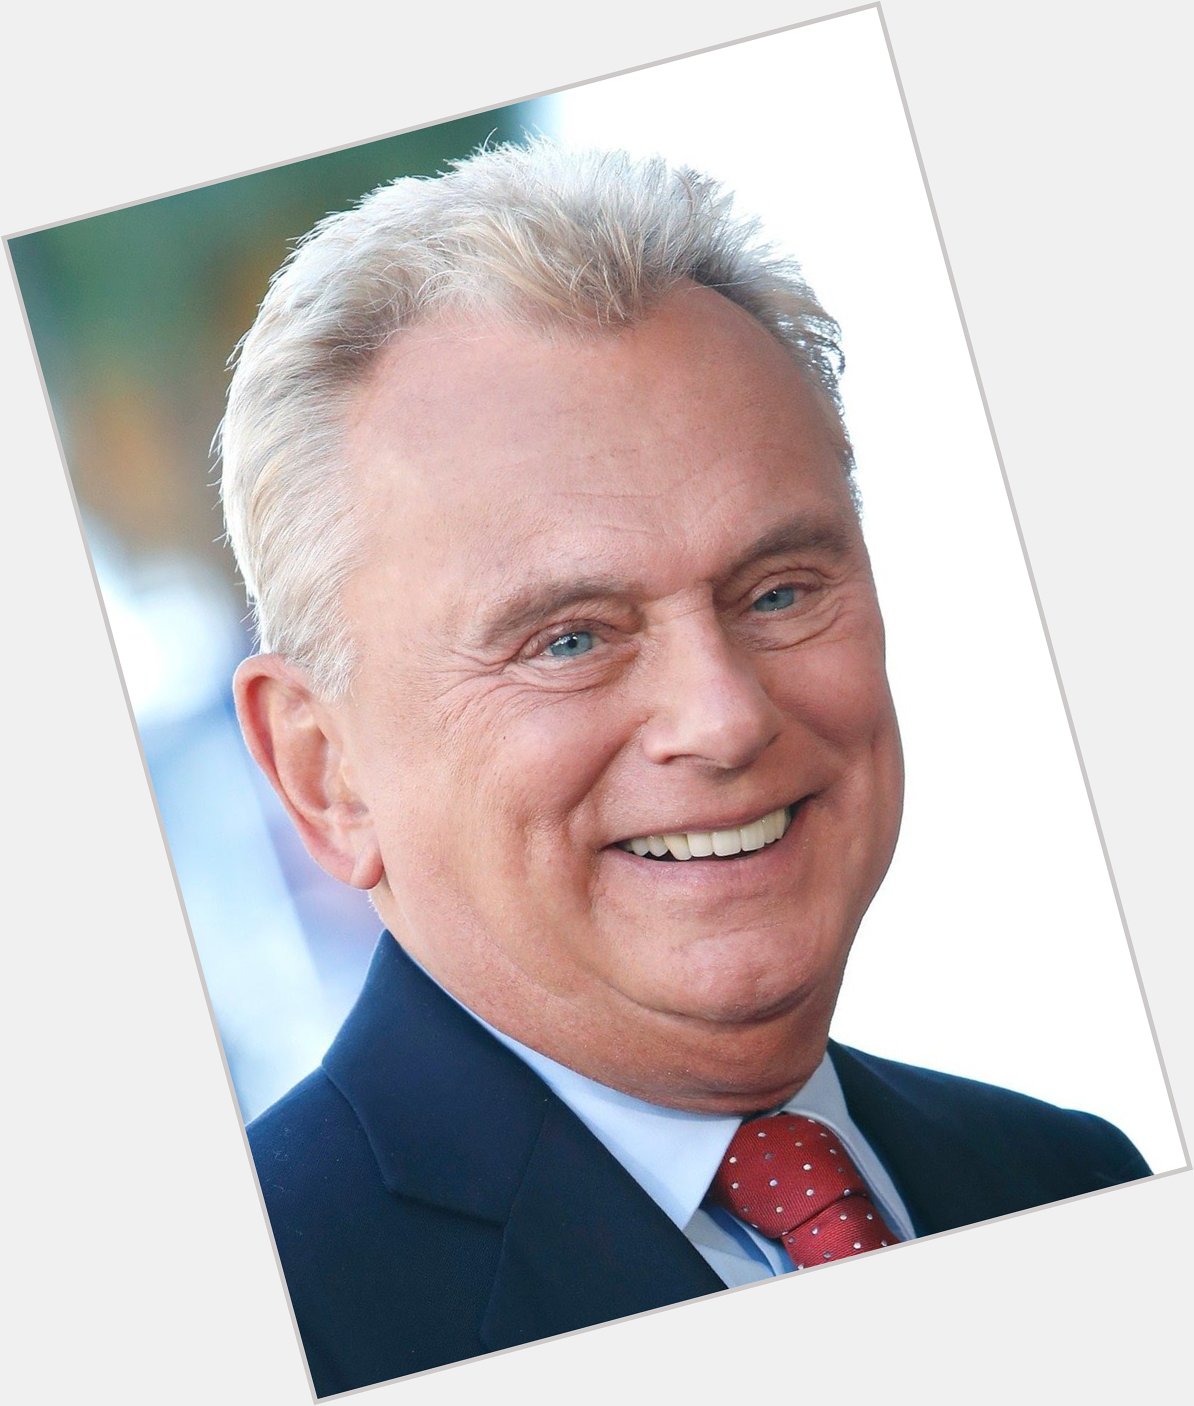 Happy birthday Pat Sajak you are 75 years old today and your great as the host of Wheel of Fortune. 